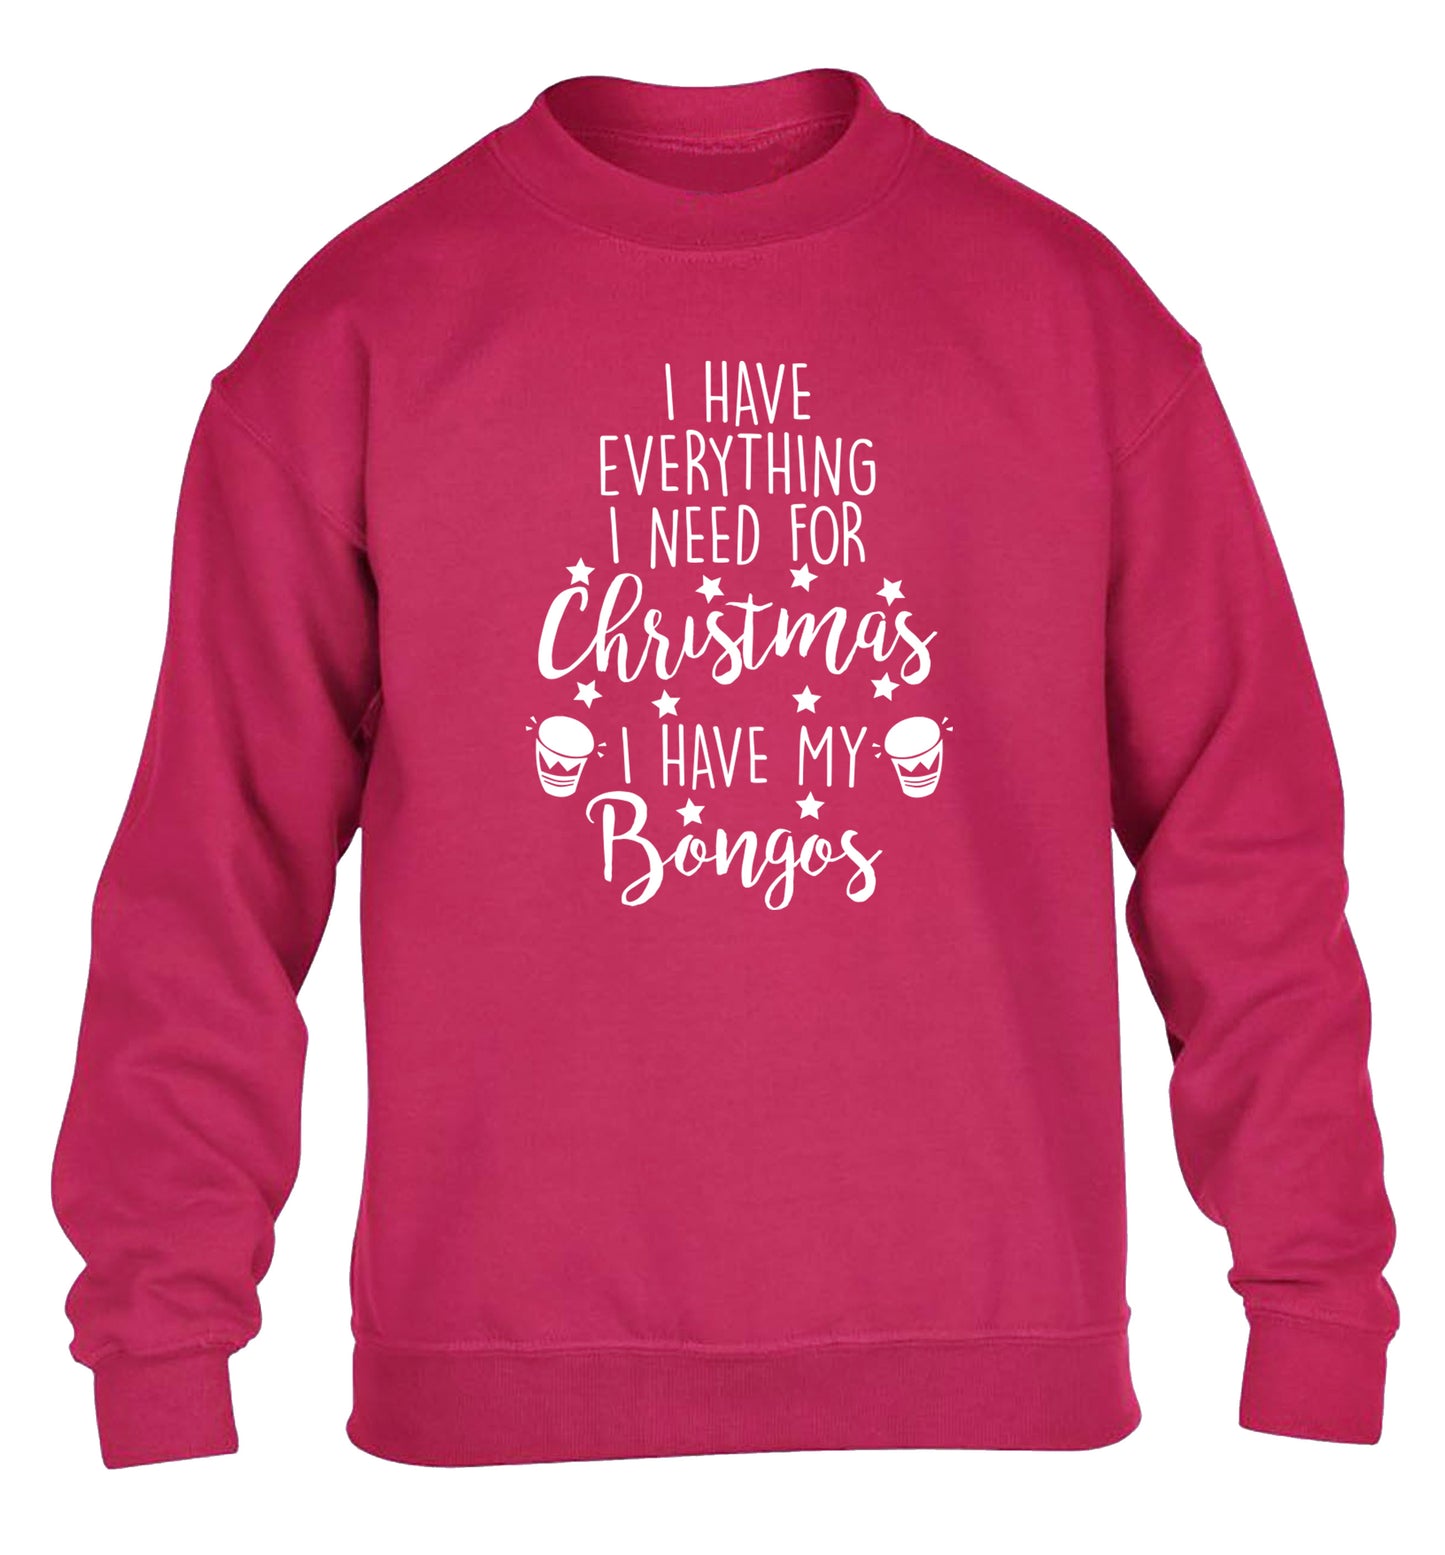 I have everything I need for Christmas I have my bongos! children's pink sweater 12-14 Years